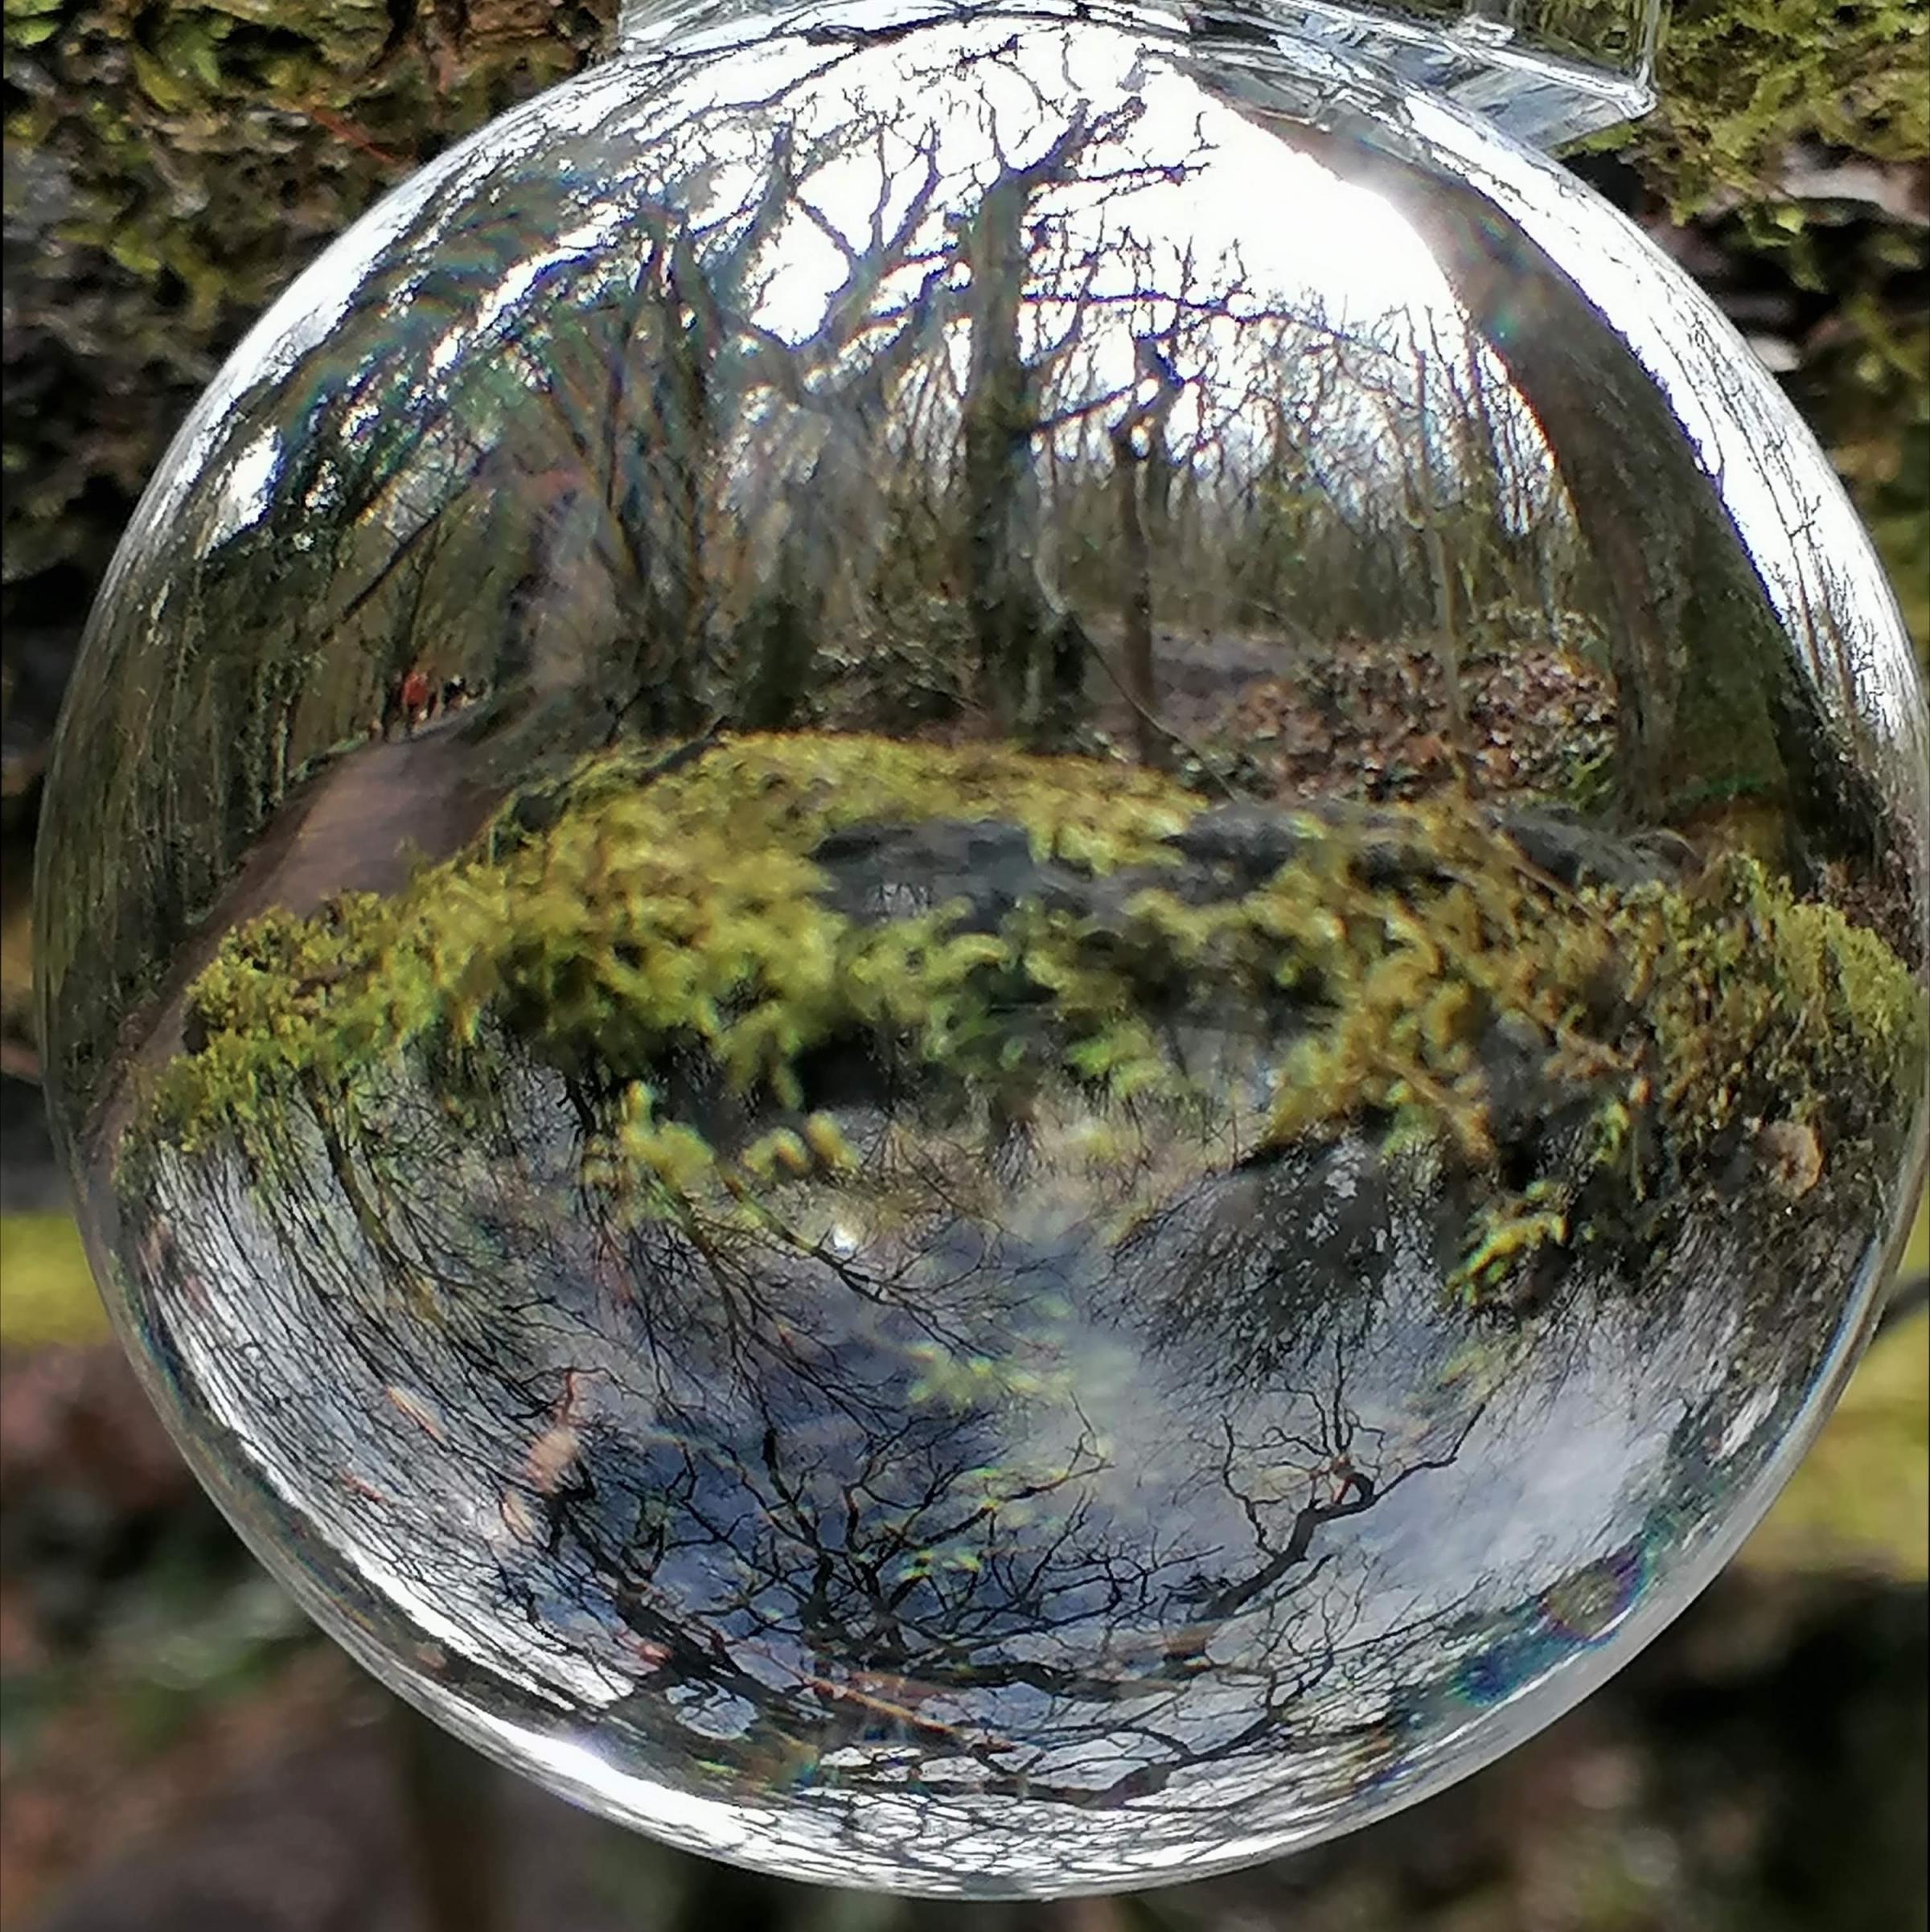 Karen loves experimenting with a lens ball to create unusual images